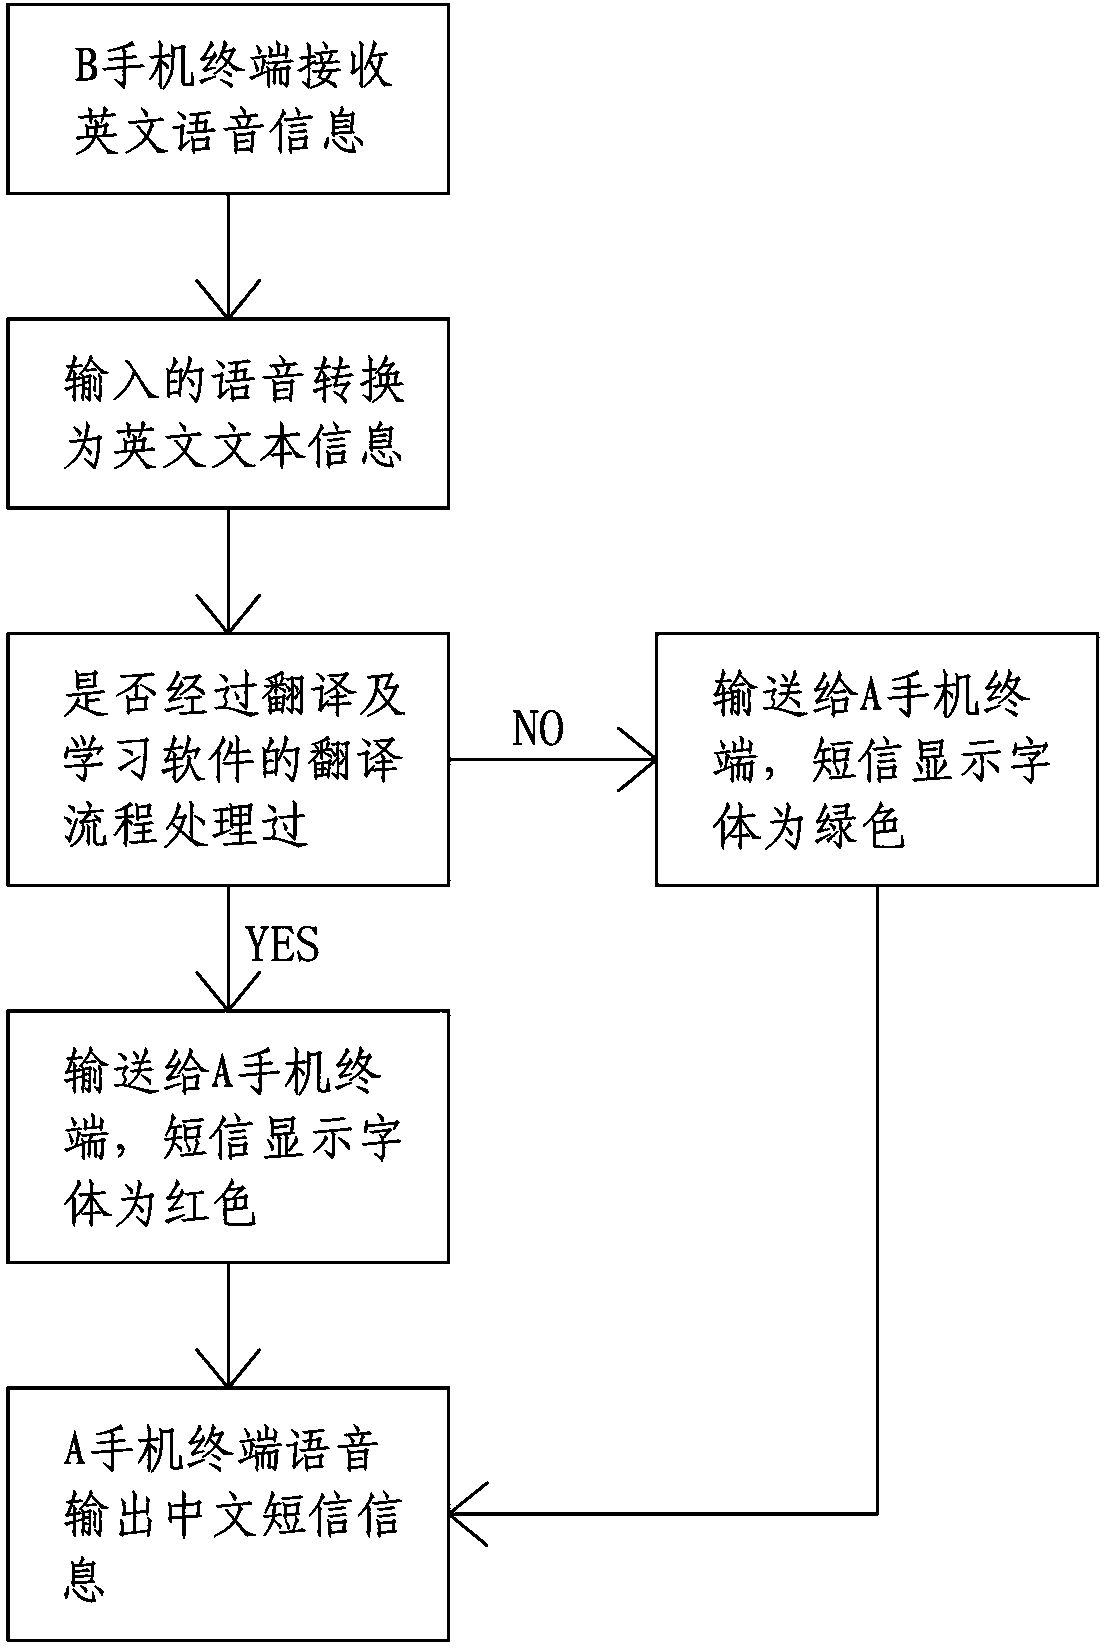 System for automatically translating mobile phone message in both Chinese and English and learning English